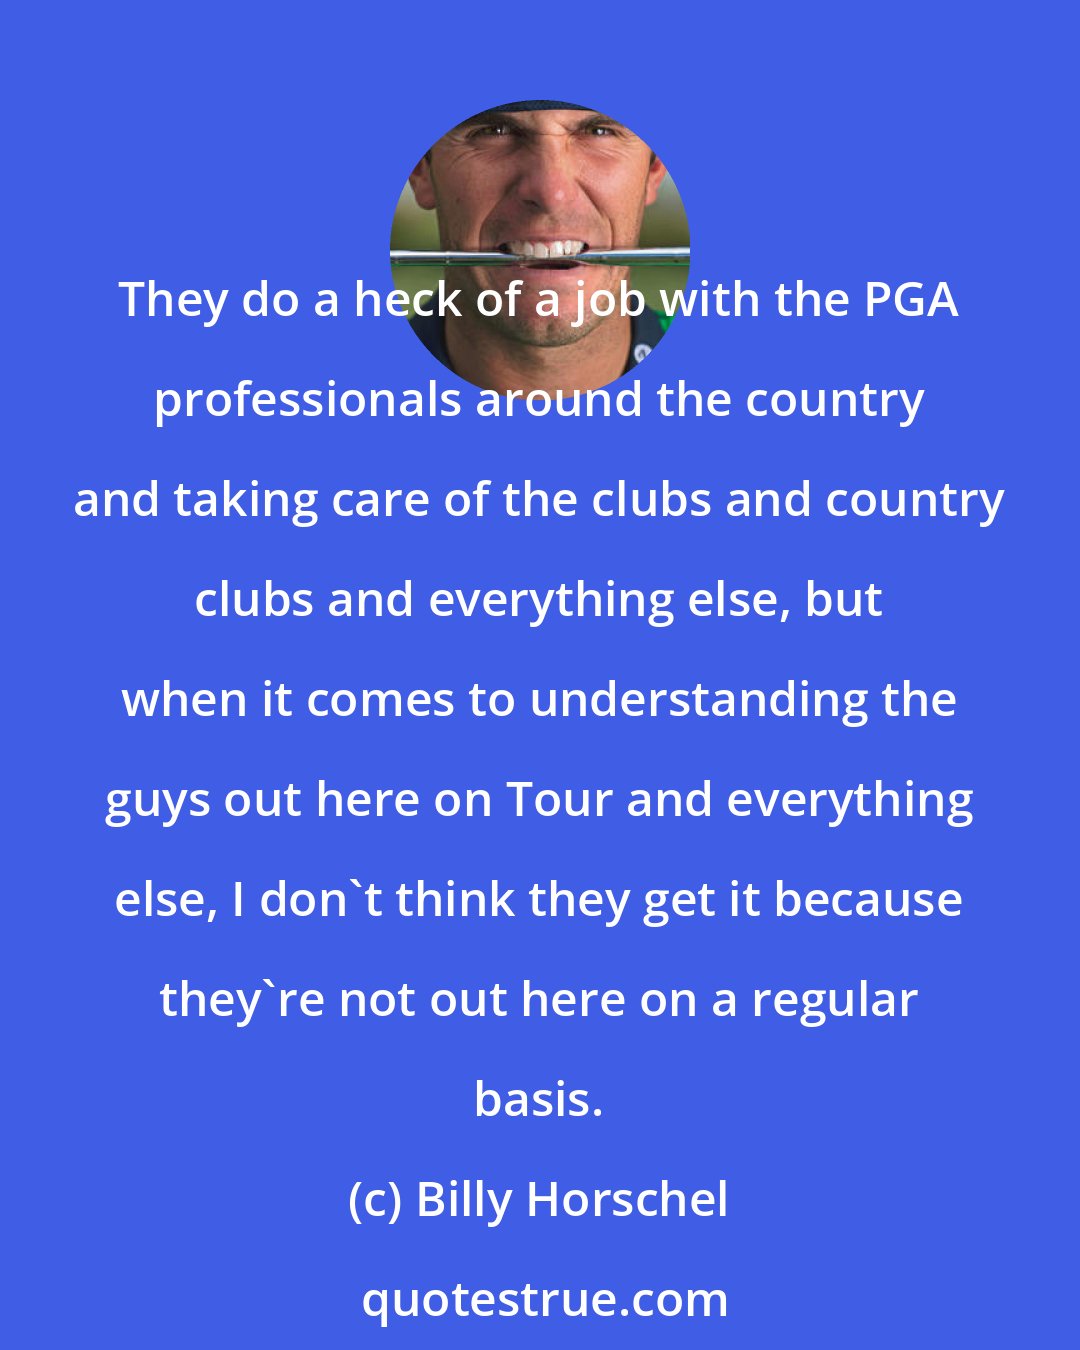 Billy Horschel: They do a heck of a job with the PGA professionals around the country and taking care of the clubs and country clubs and everything else, but when it comes to understanding the guys out here on Tour and everything else, I don't think they get it because they're not out here on a regular basis.